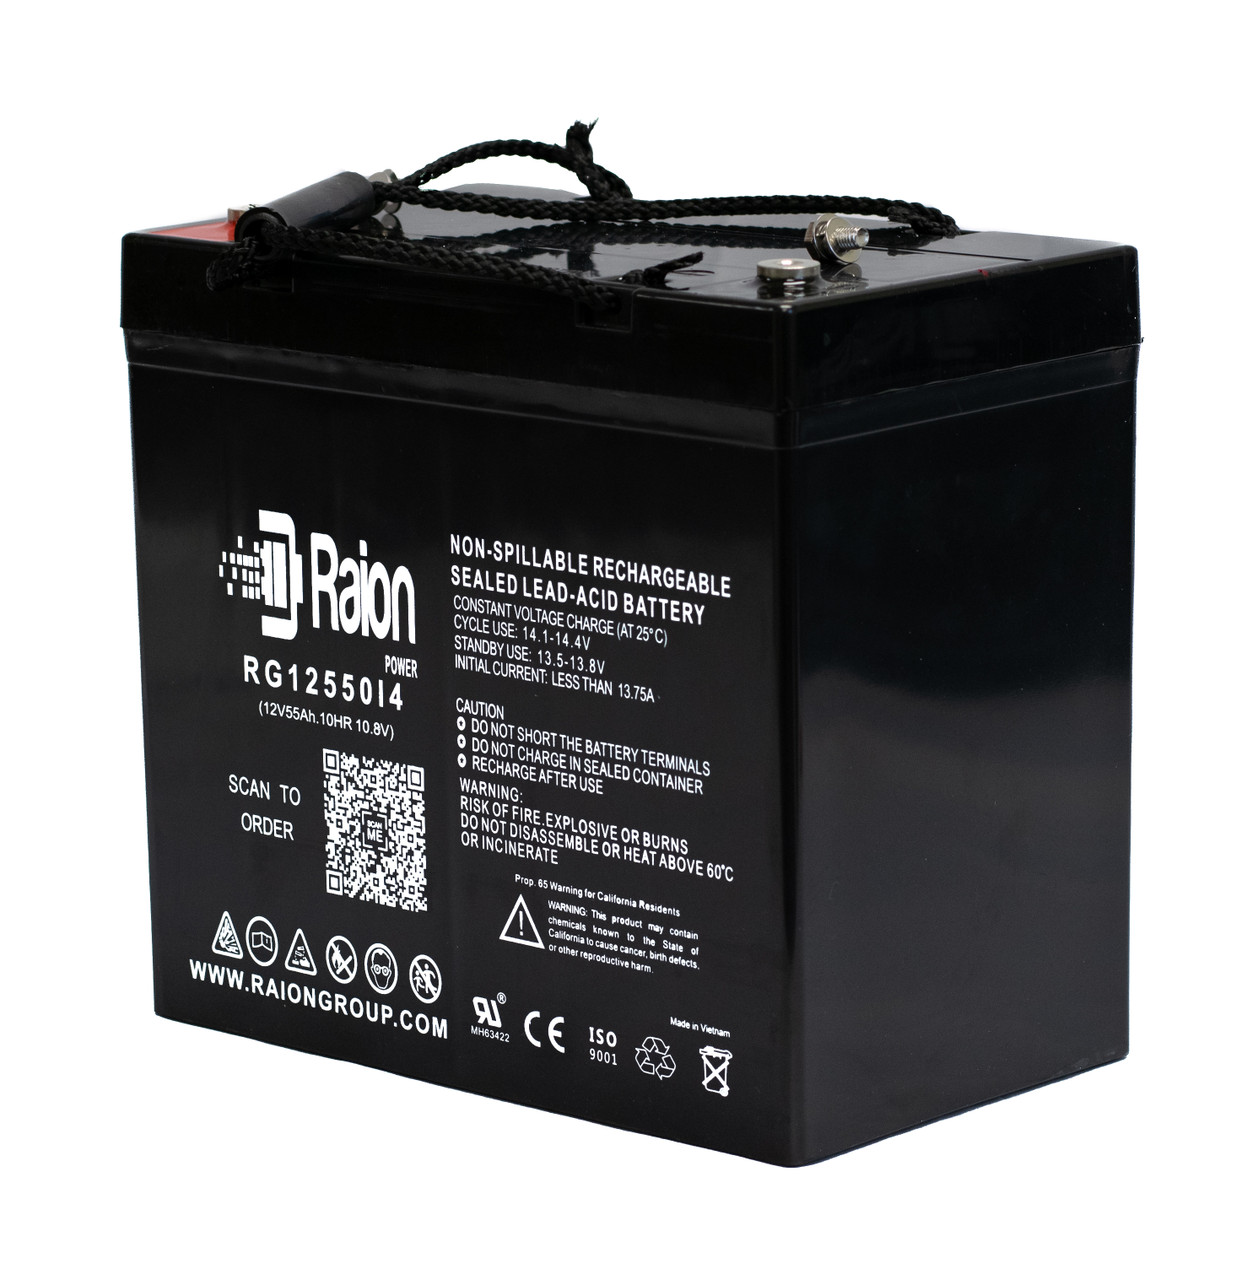 Raion Power 12V 55Ah 22NF Mobility Scooter Battery Replacement for Sun Xtender AGM1255T